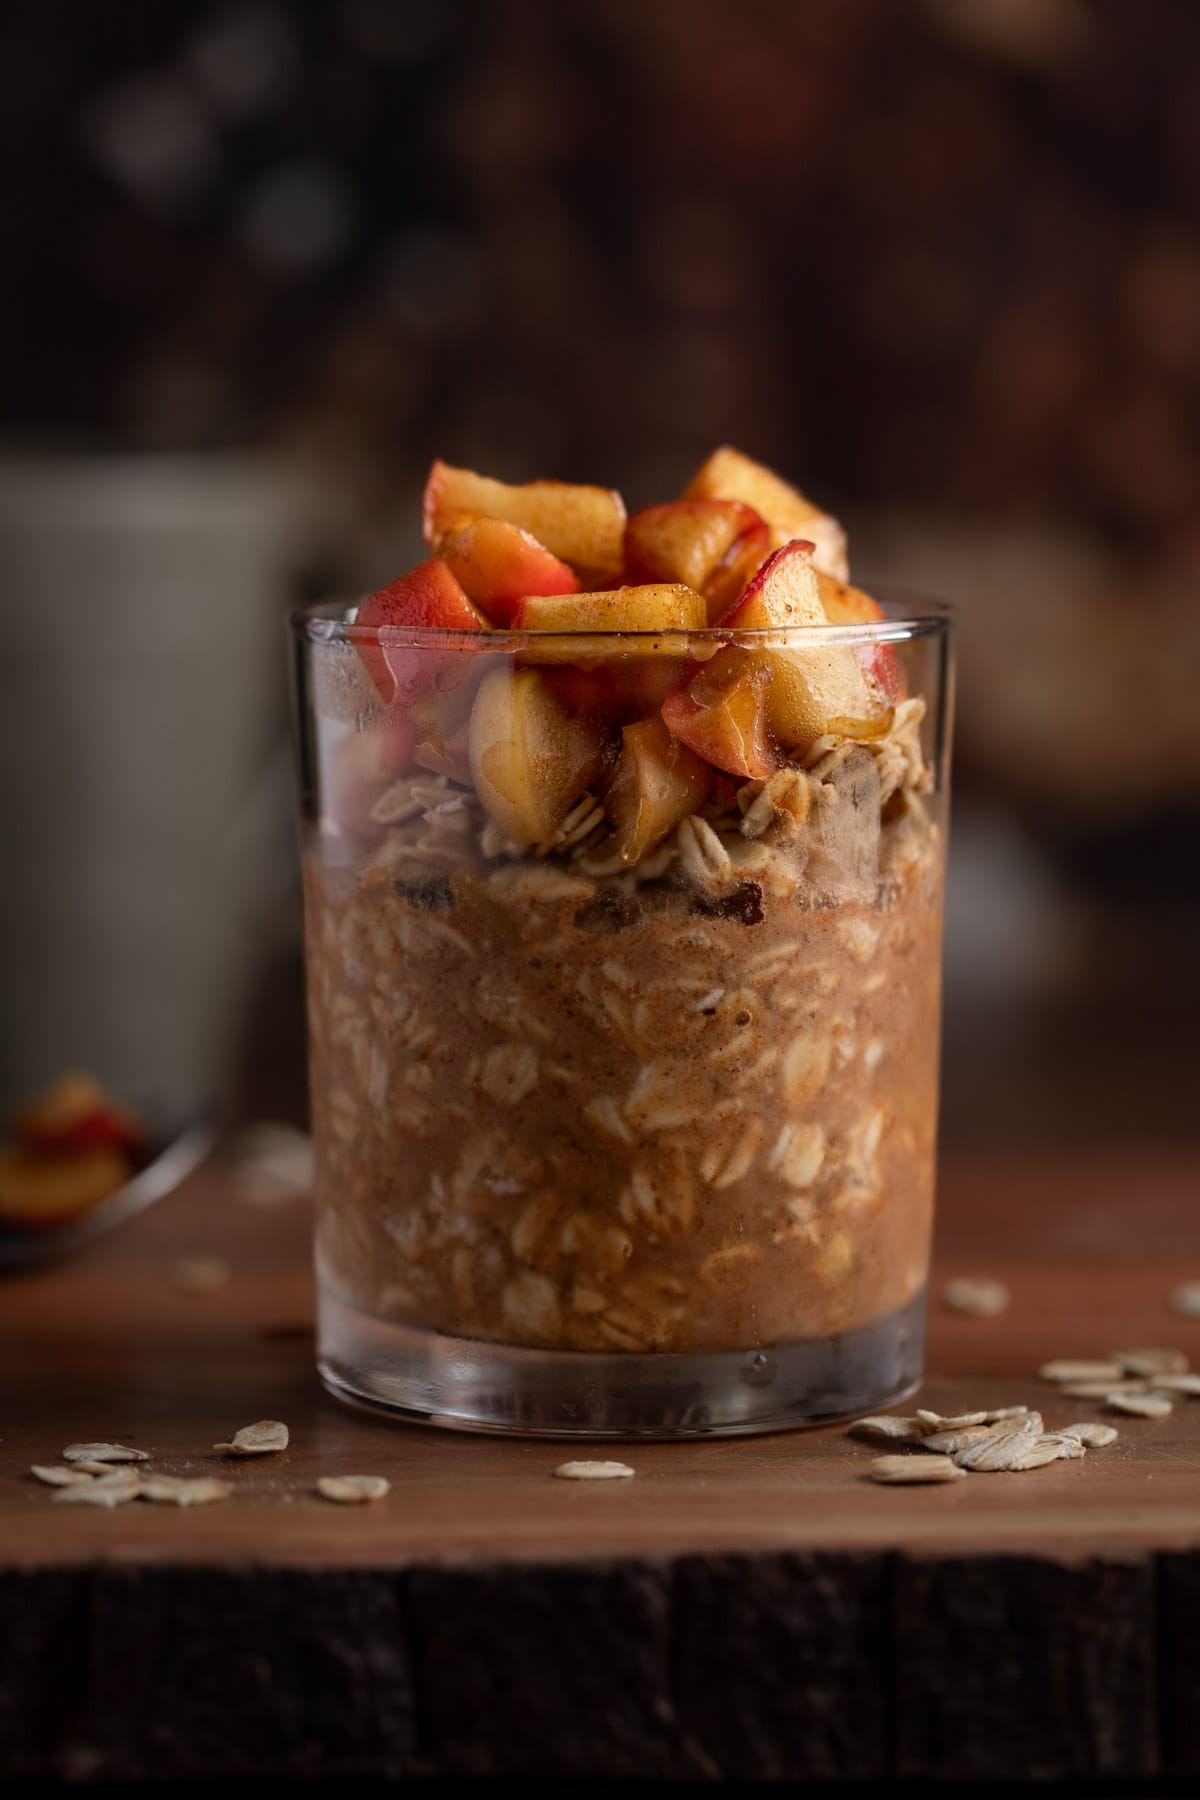 Eye level view of apple pie oats in a jar, sitting on a wooden table.